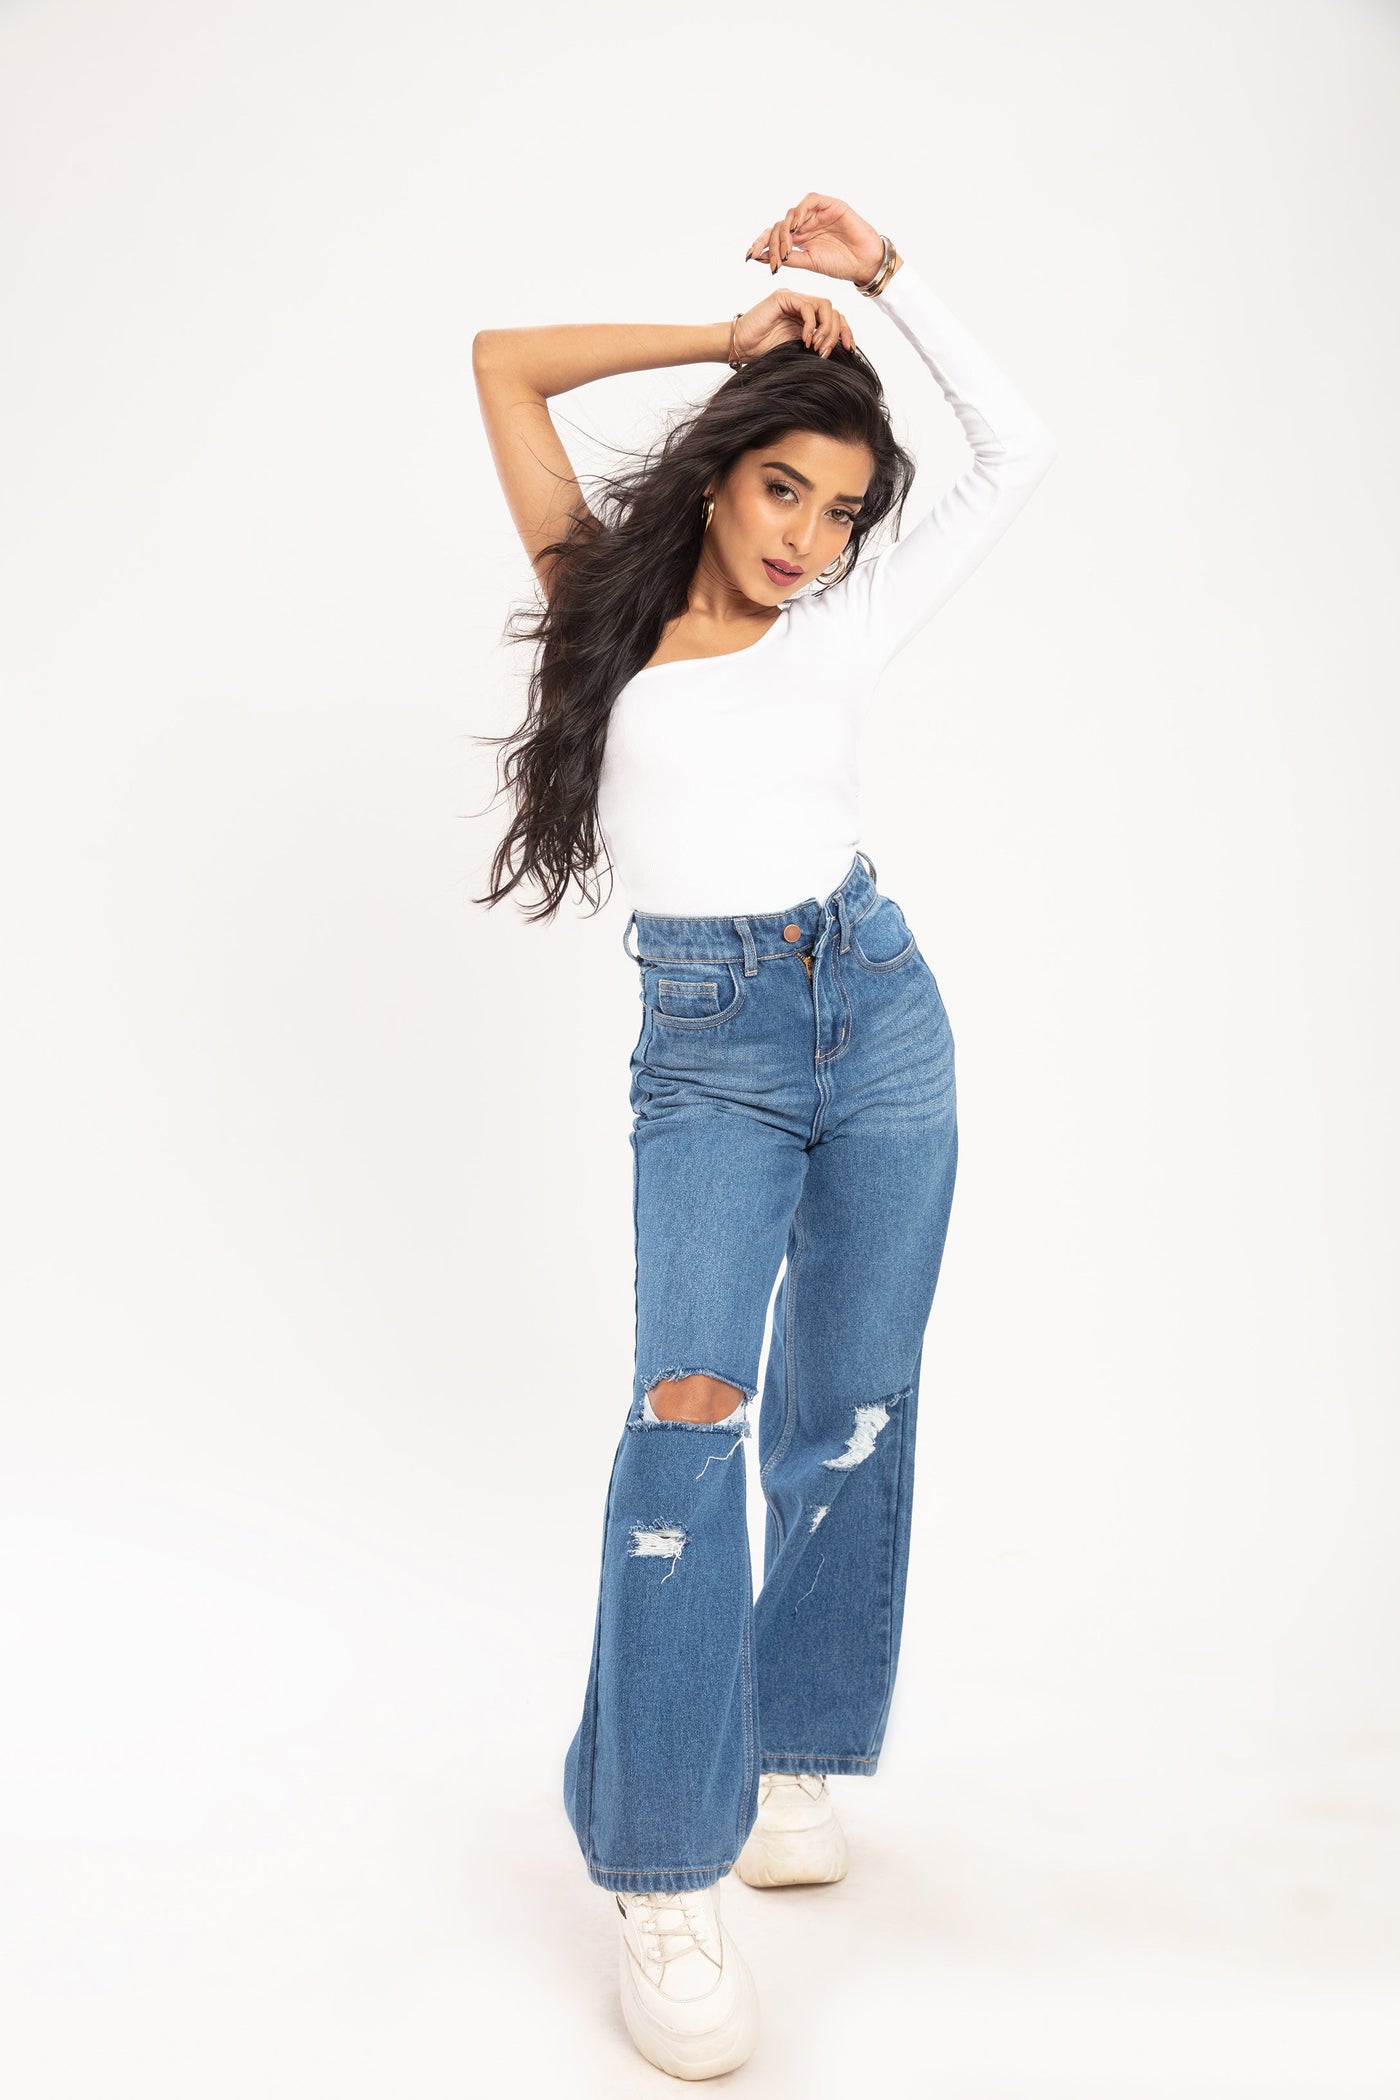 Cut Out Waist Jeans  Cut Out High Waist Jeans  OFFDUTY INDIA  Offduty  India